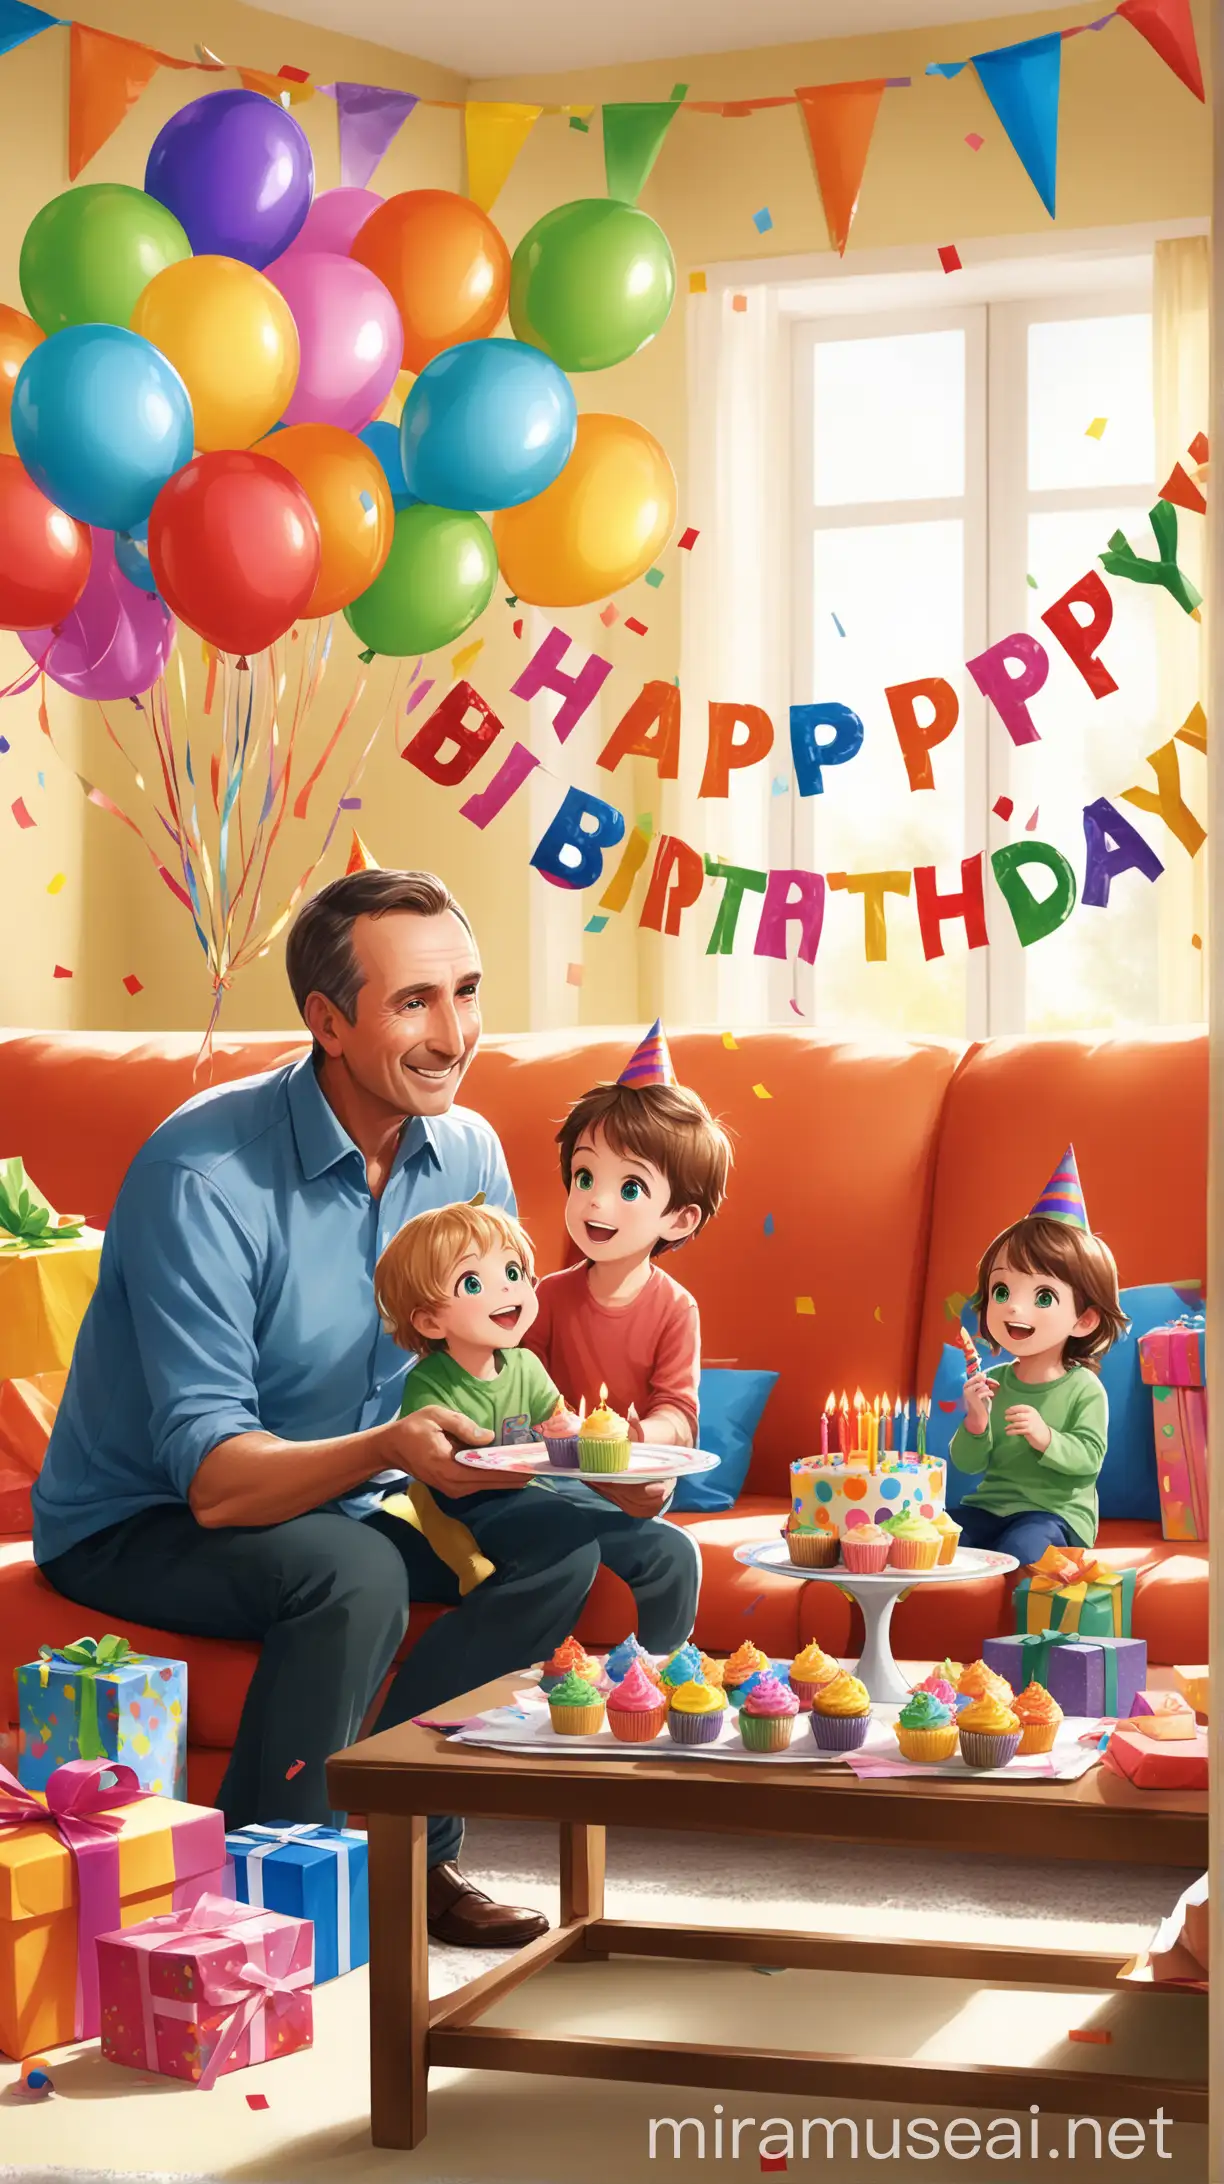 Father Decorating Sunlit Birthday Party with Colorful Decorations and Gifts